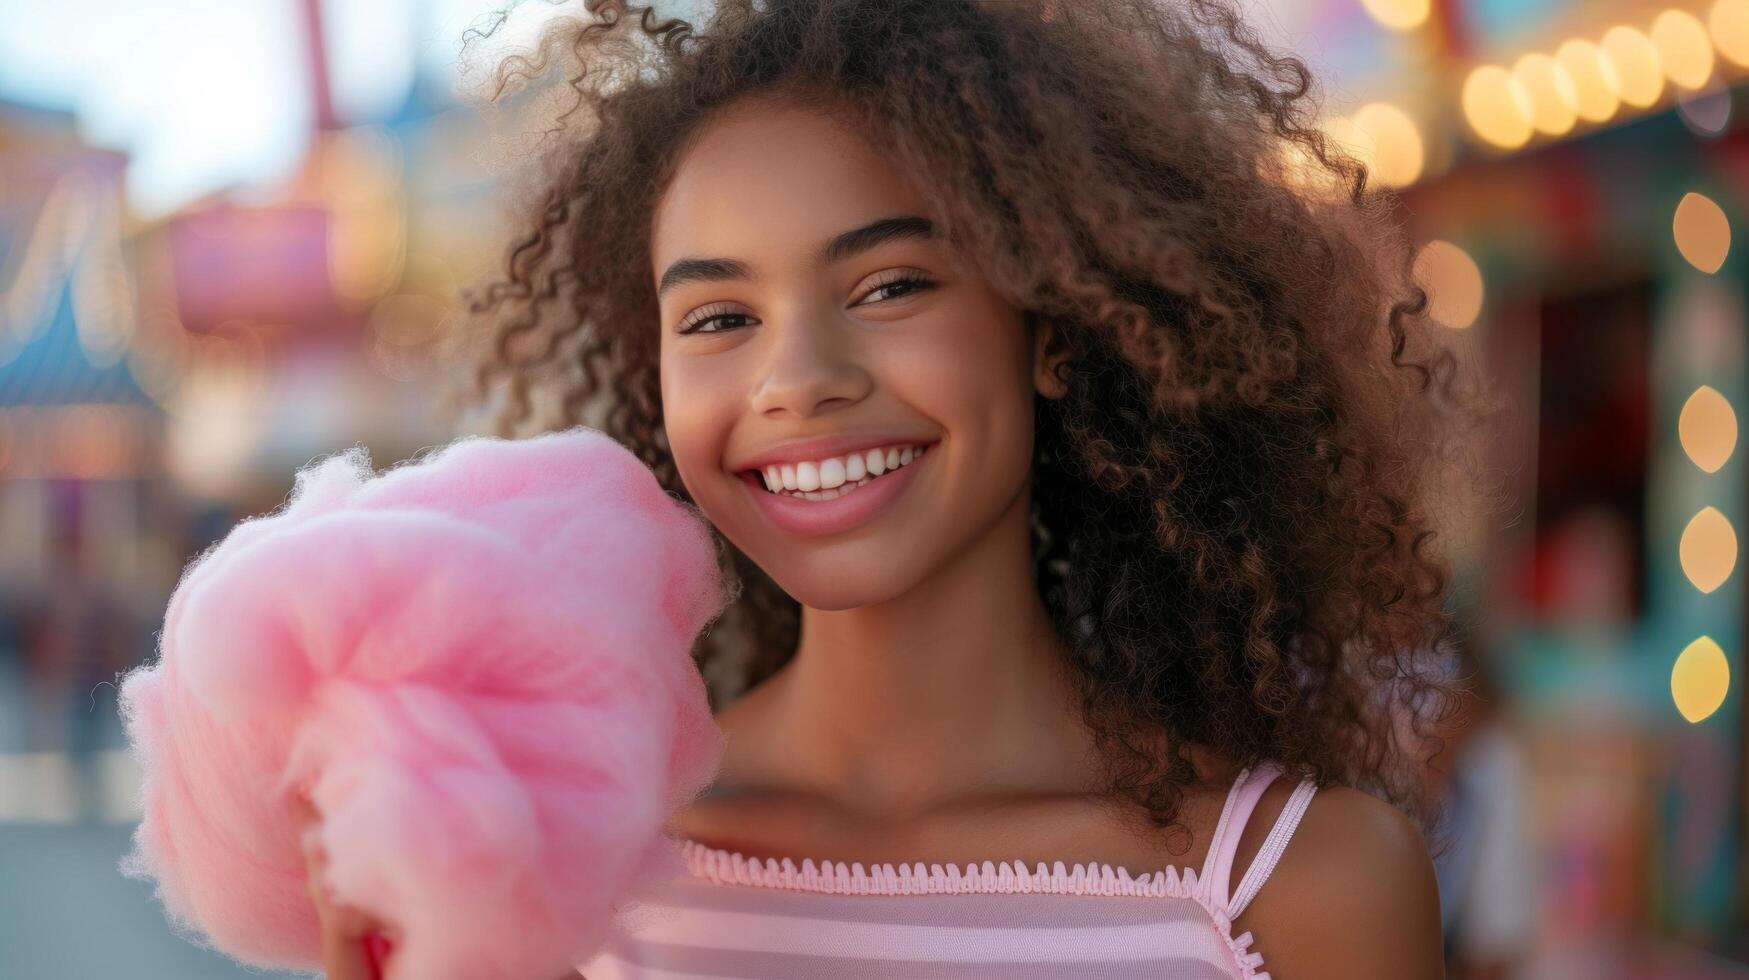 AI generated A beautiful girl, stands smiling and looking at the camera, holding a large pink cotton candy in her hand. photo